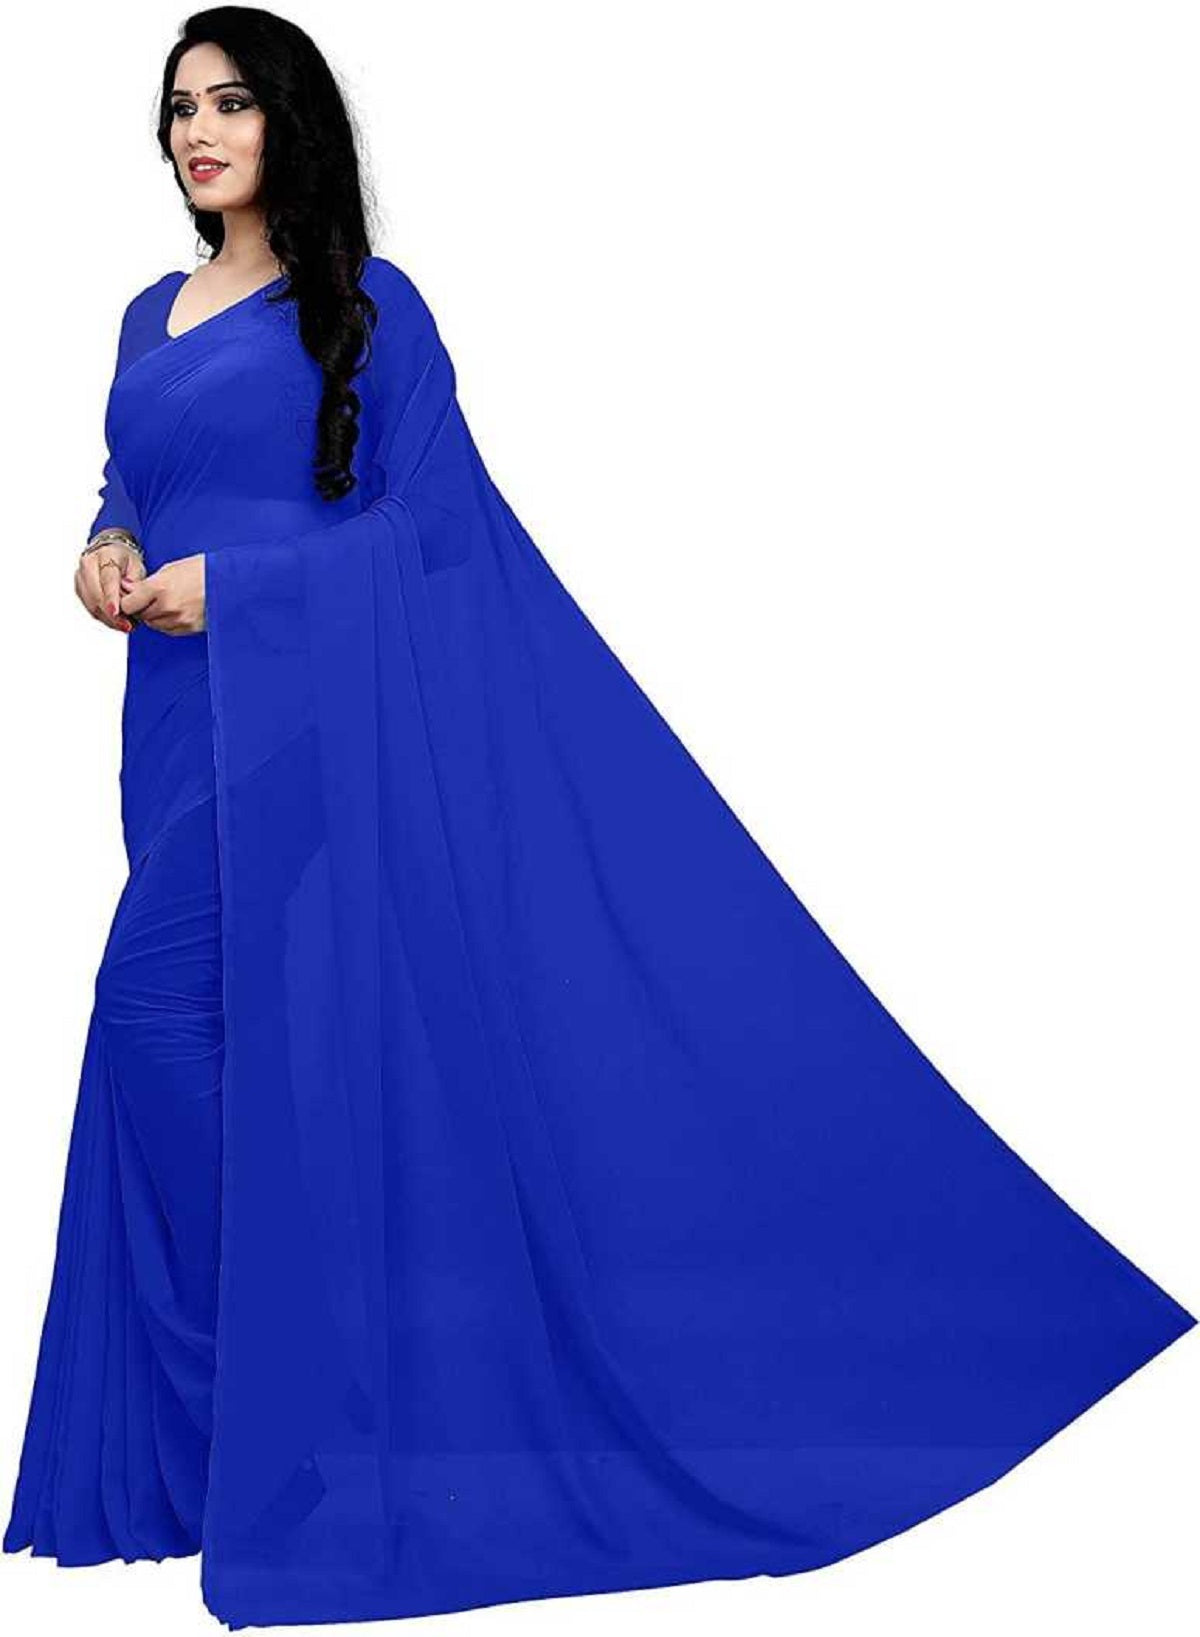 Women's Plain Woven Daily Wear  Formal Georgette Sari With Blouse Piece (Royal Blue) - NIMIDHYA